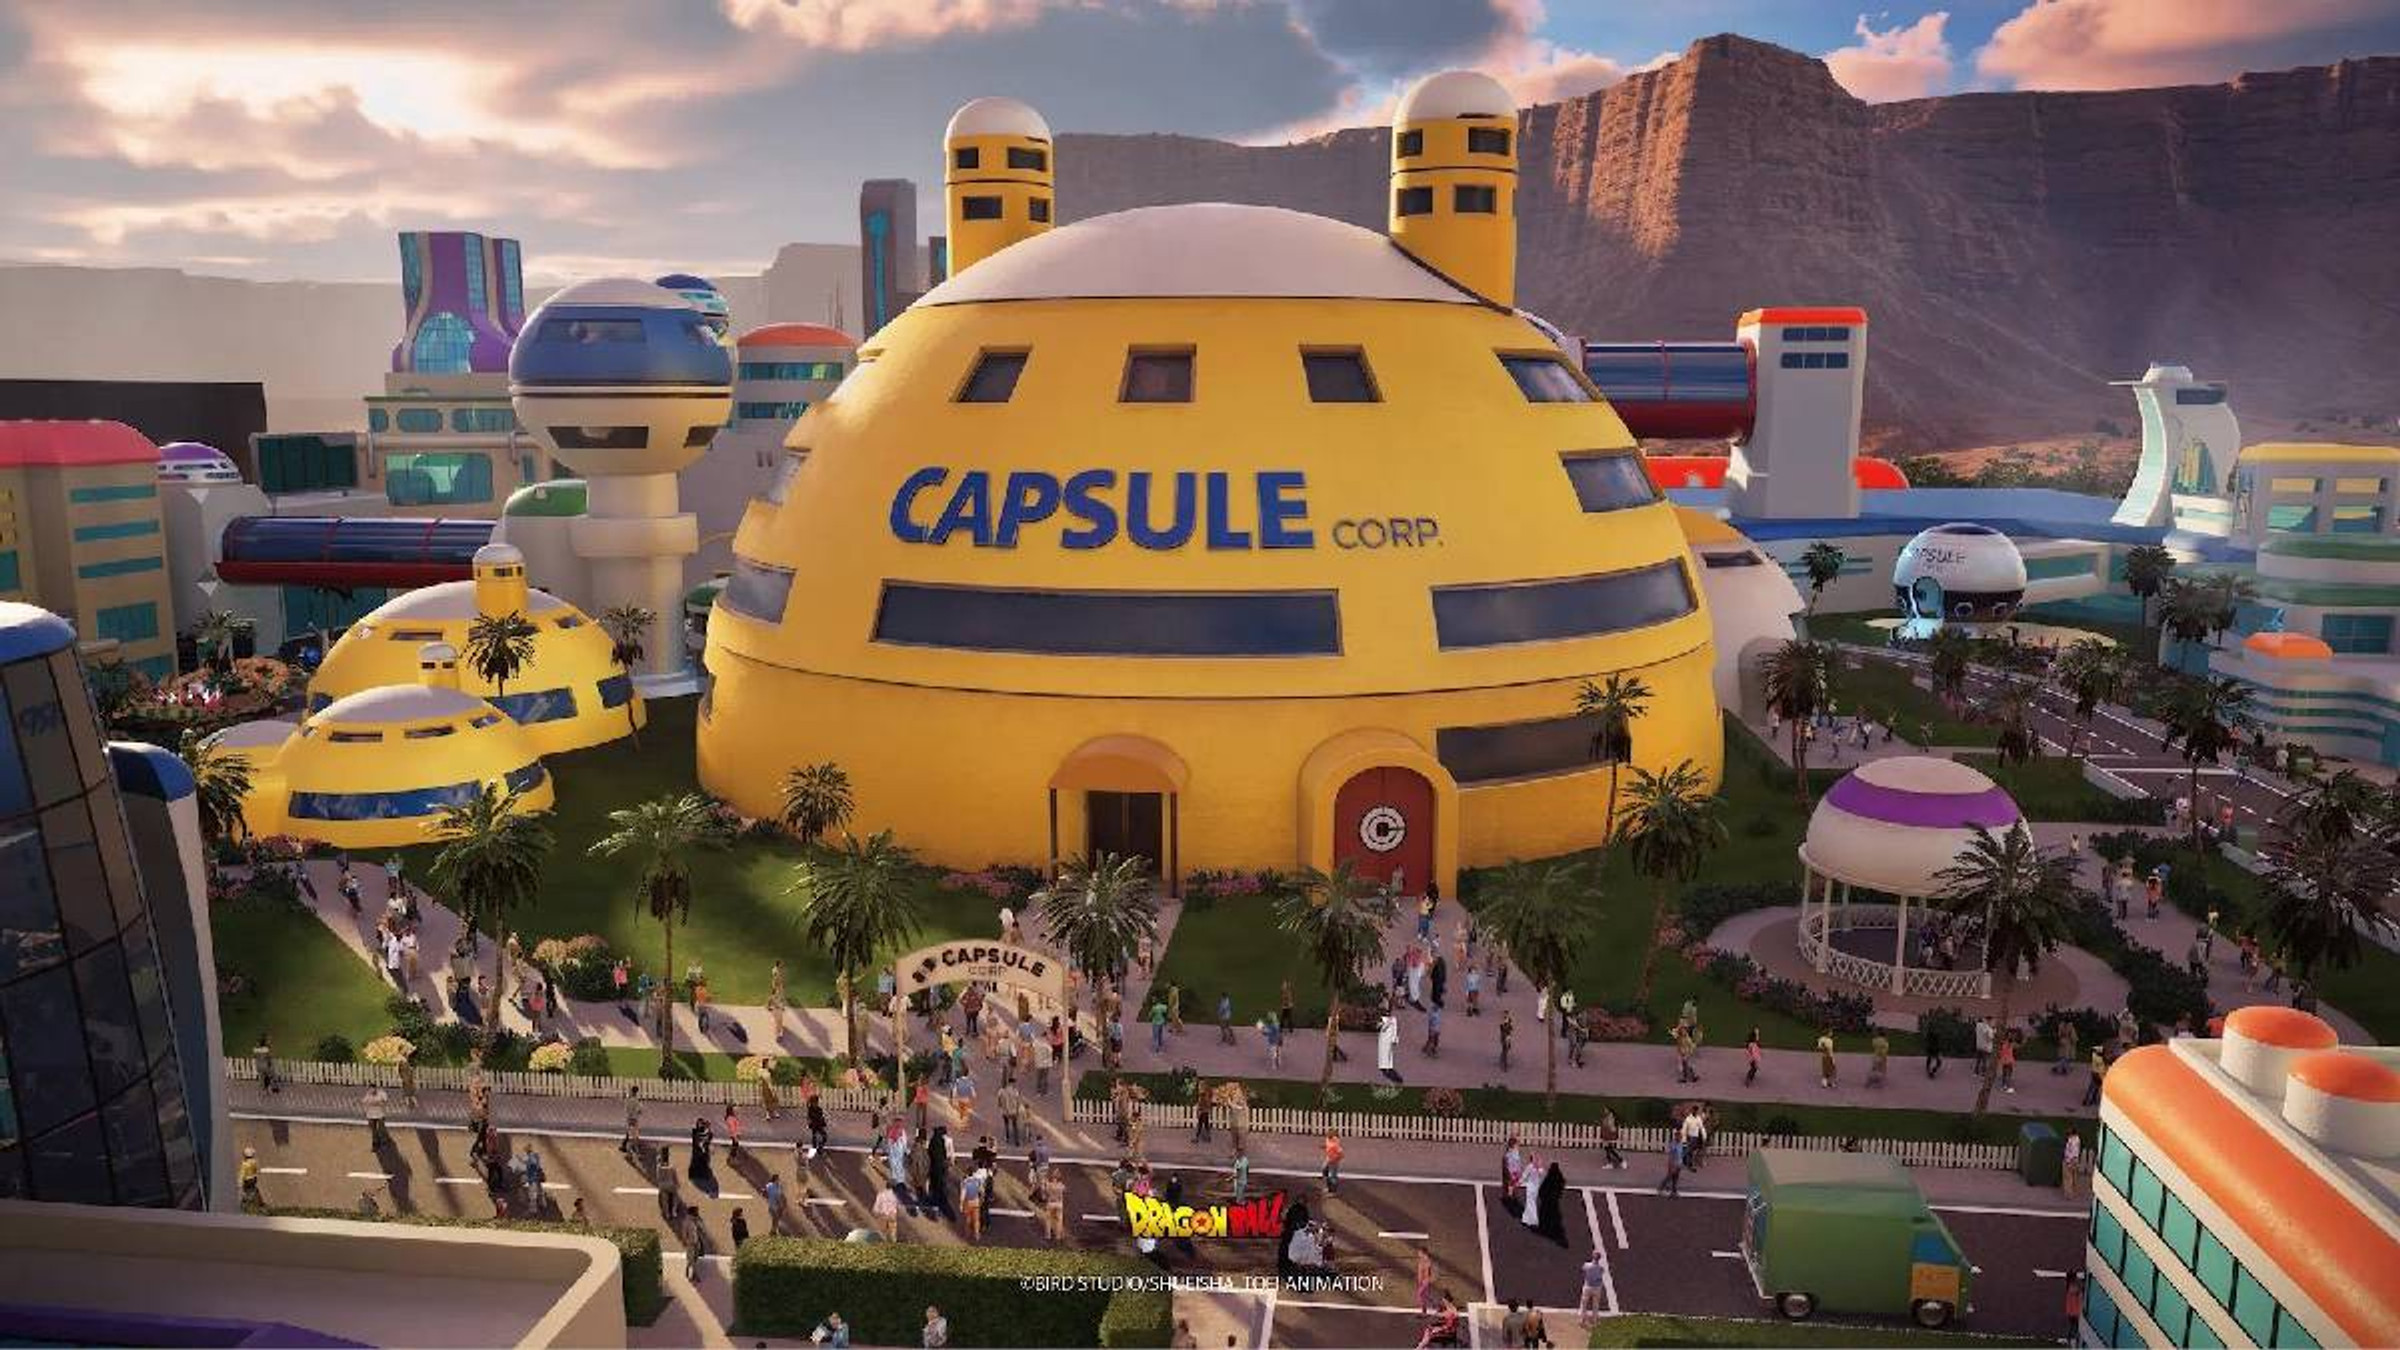 dragon-ball-parc-dattraction-capsule-corp